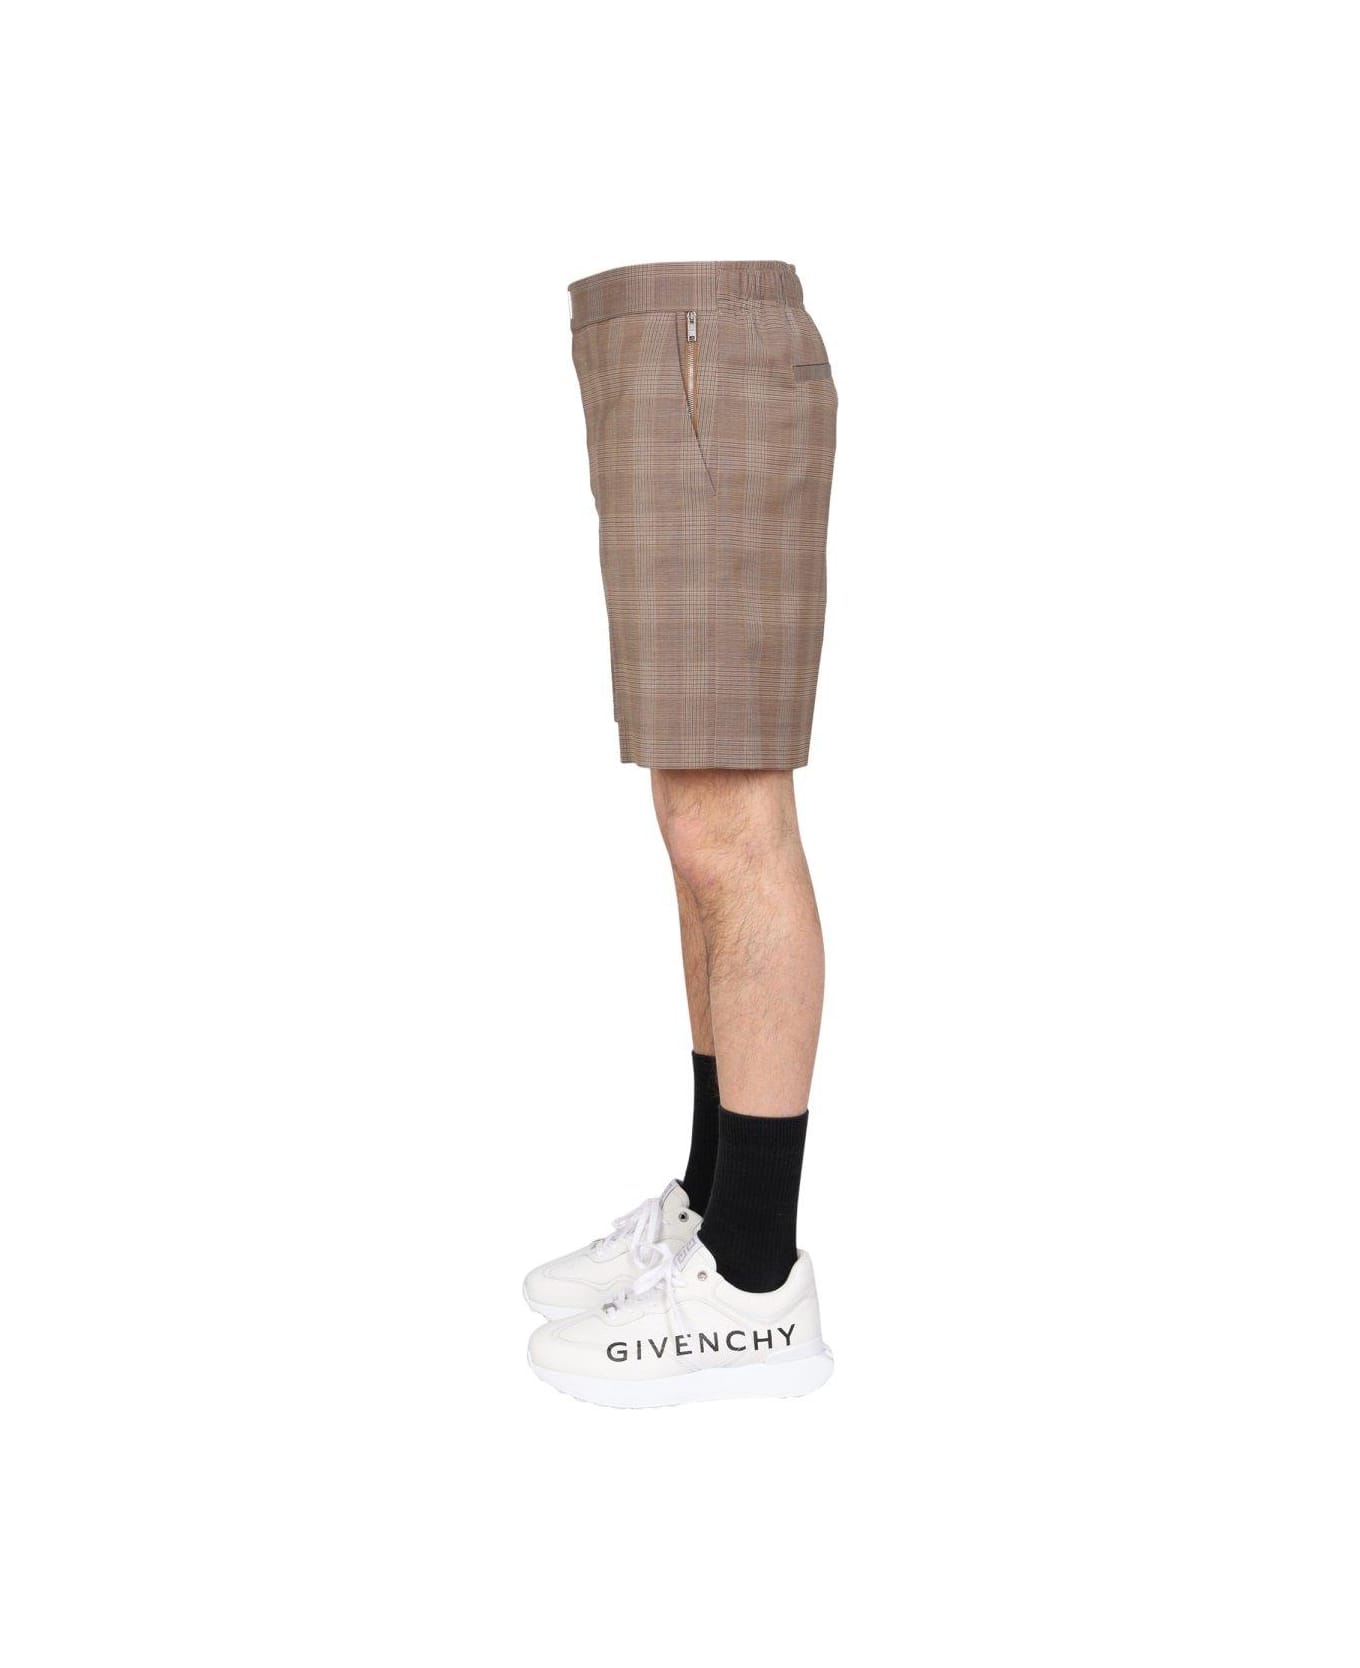 Givenchy Prince Of Wales Pattern Bermuda Shorts - BEIGE